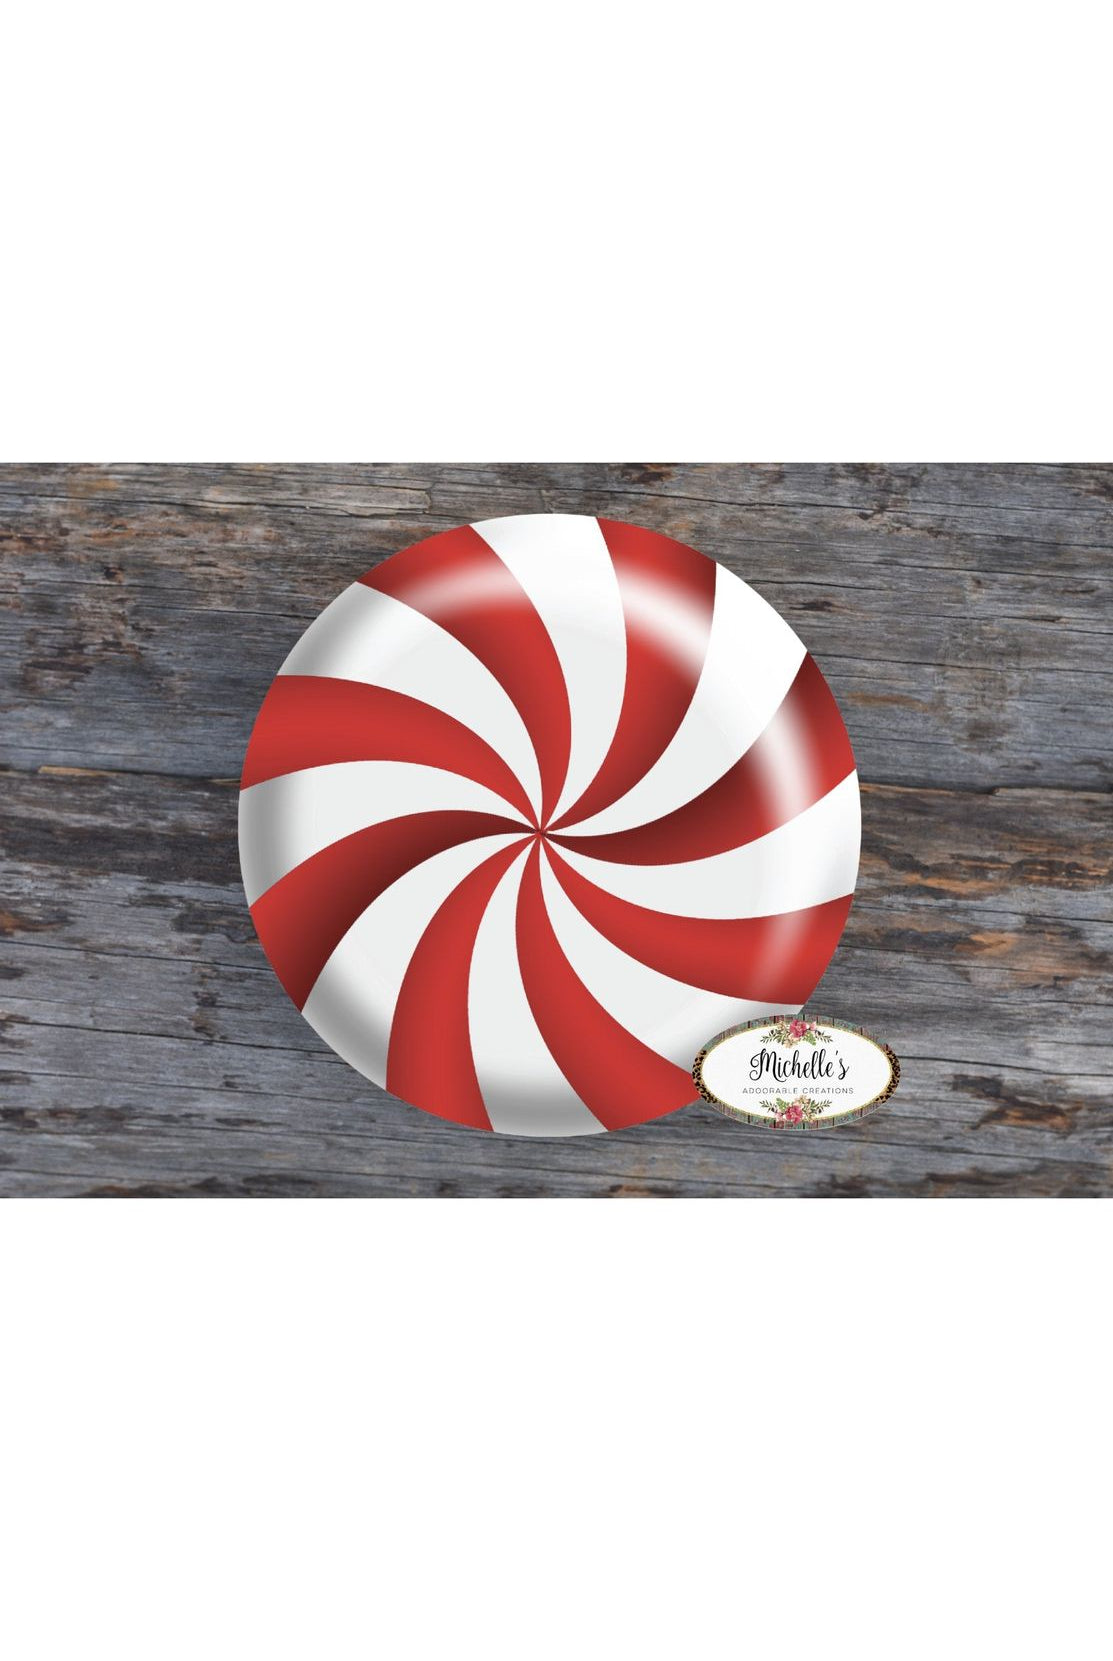 Shop For Red White Peppermint Candy Round Sign - Wreath Enhancement